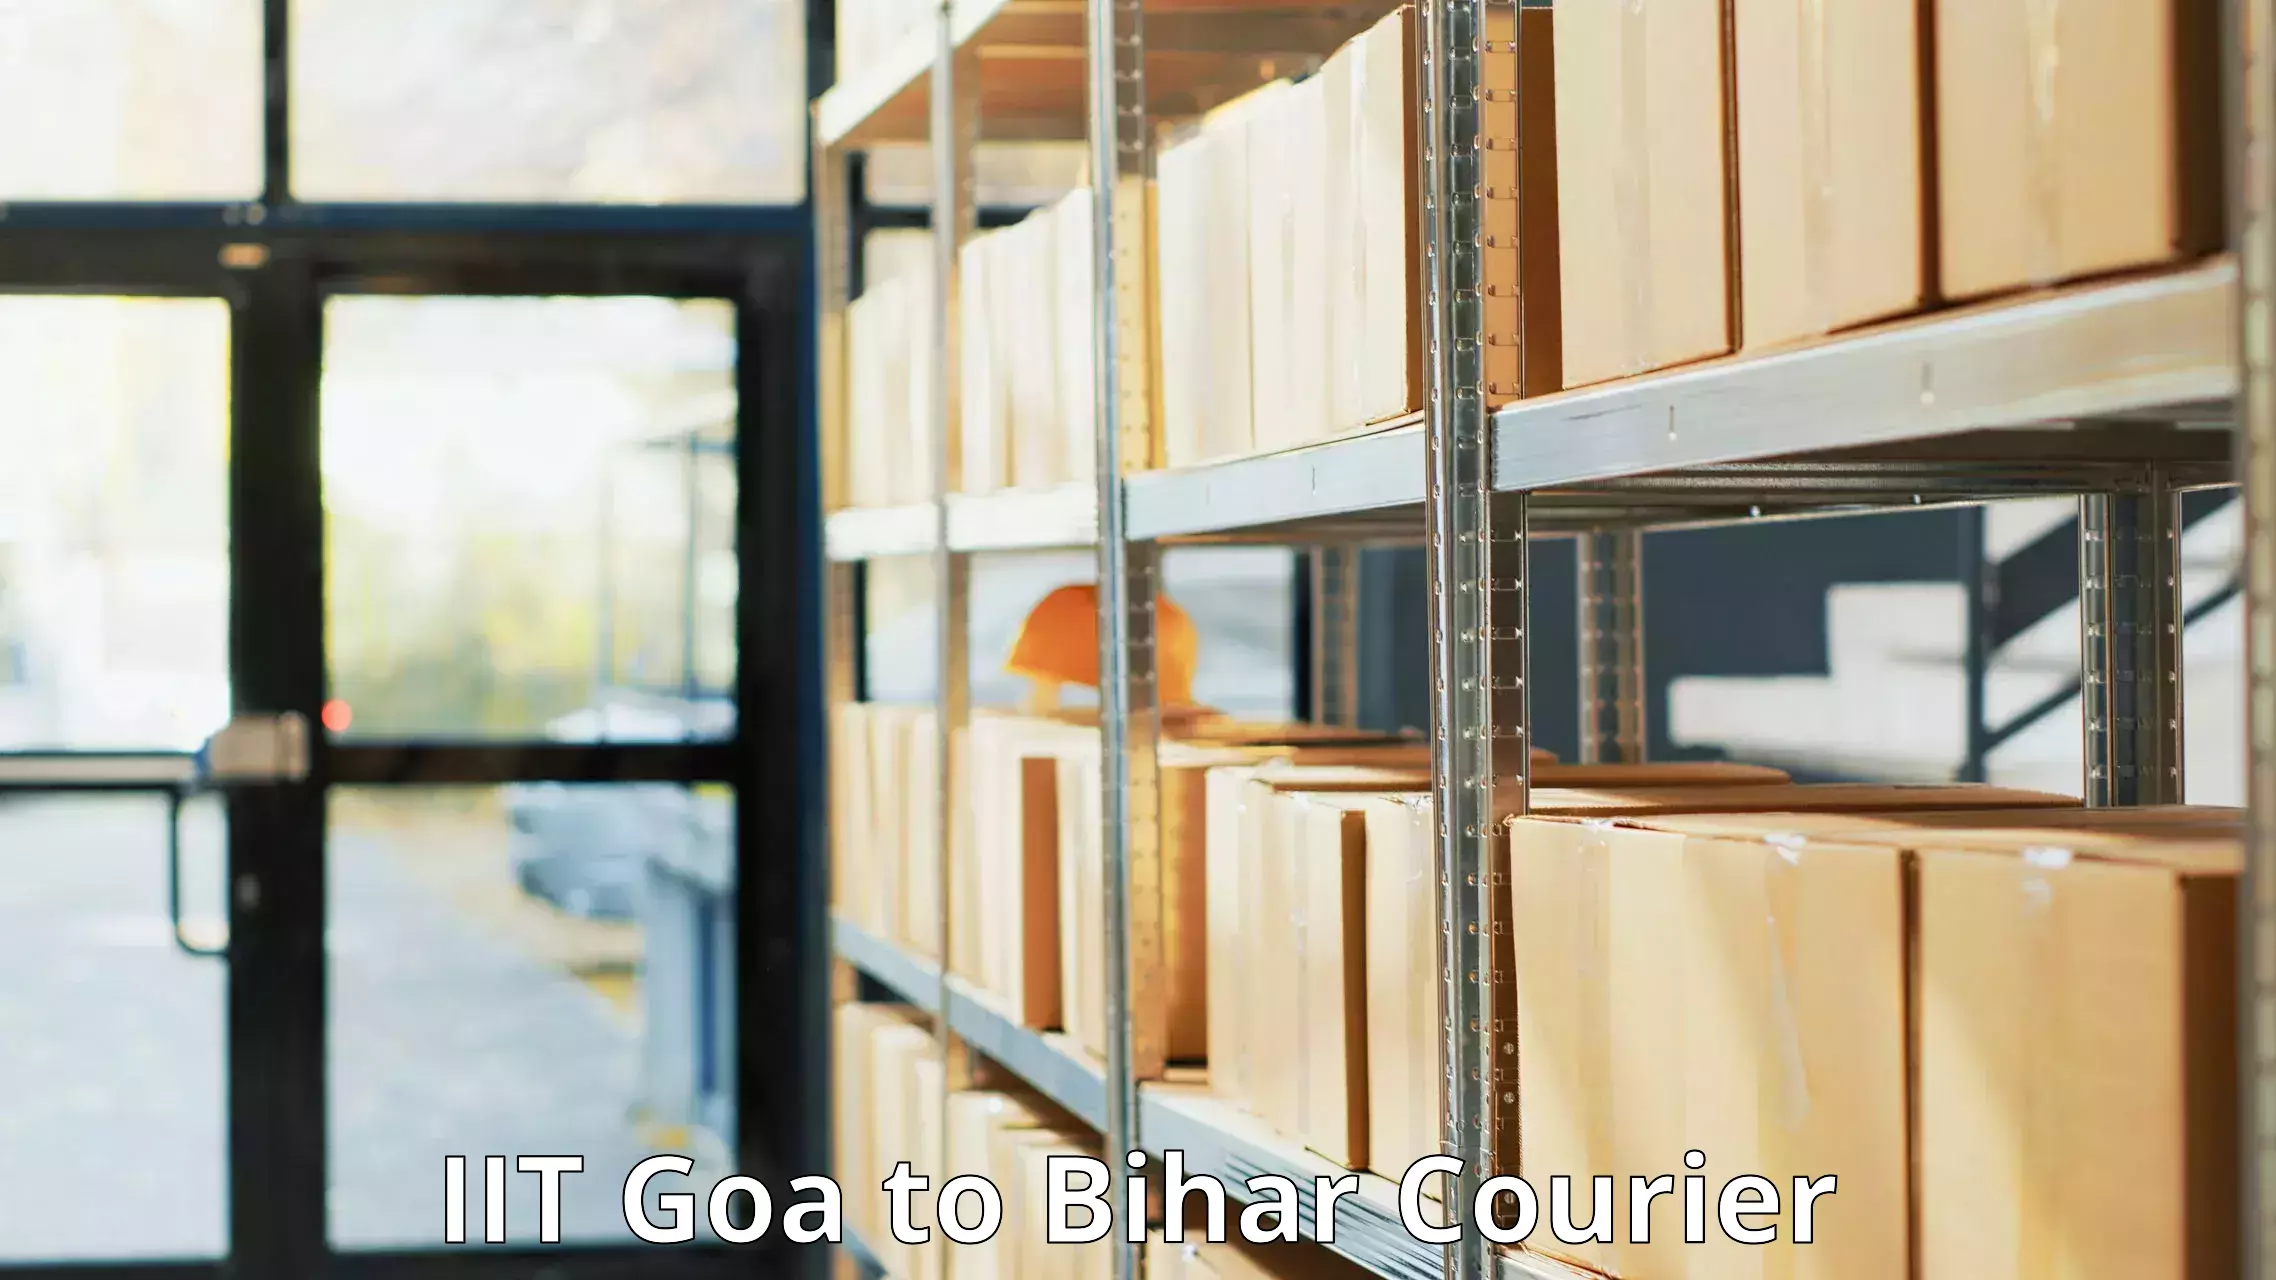 Subscription-based courier IIT Goa to Piro